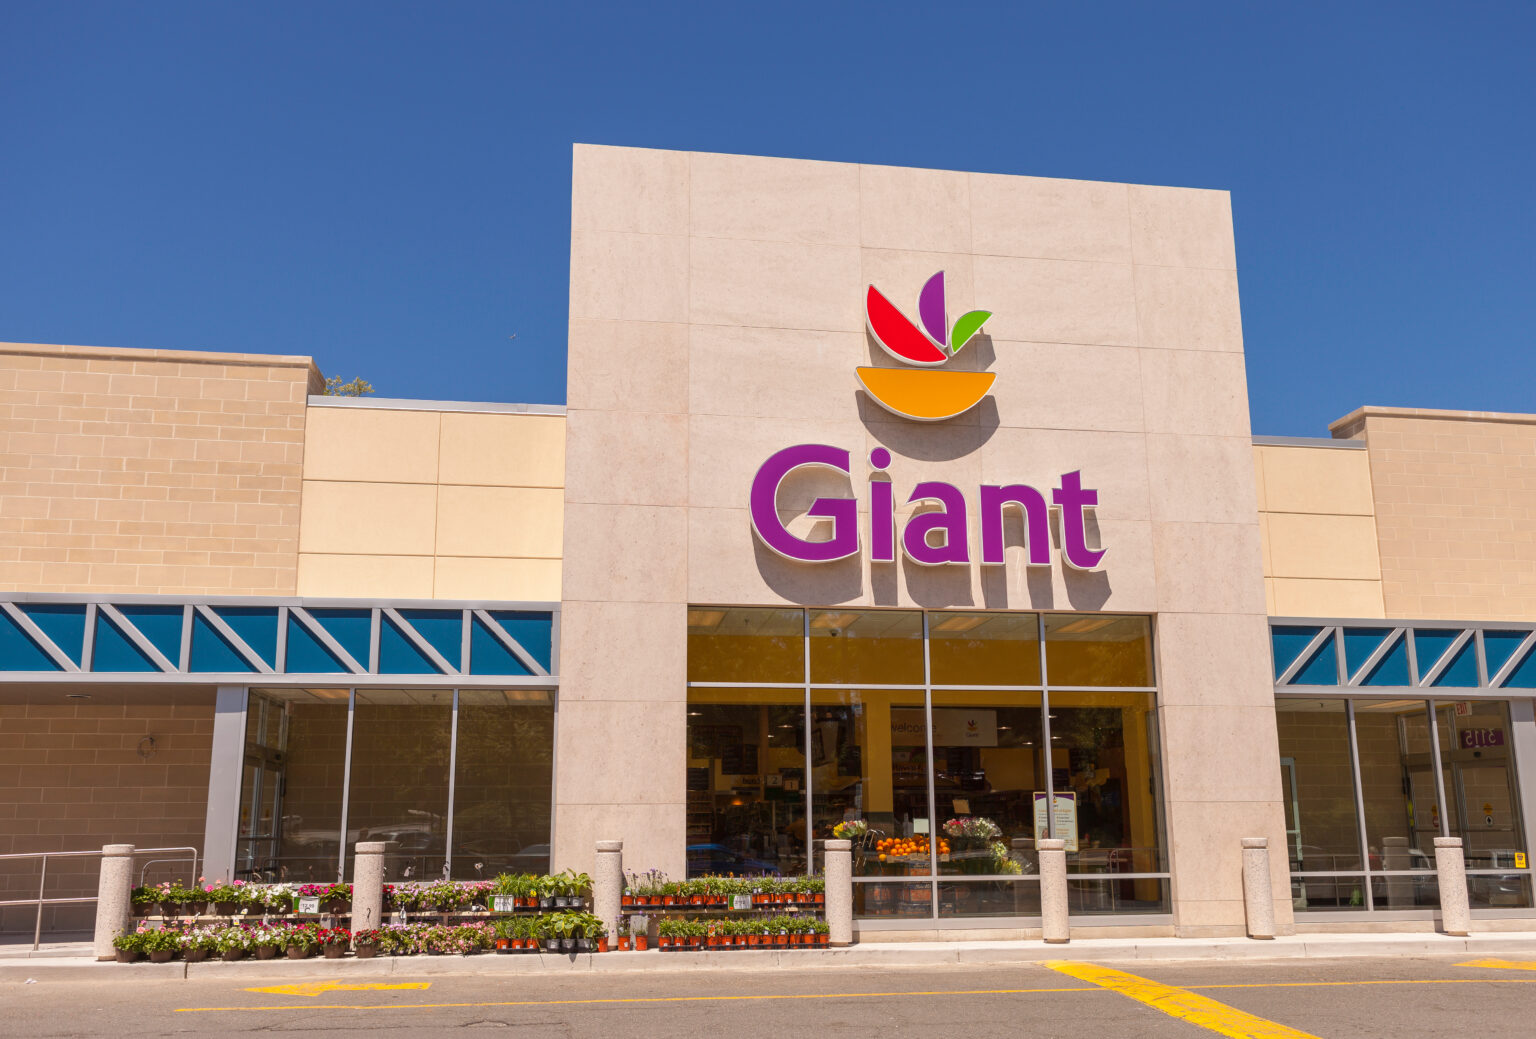 Exterior of a Giant Food store